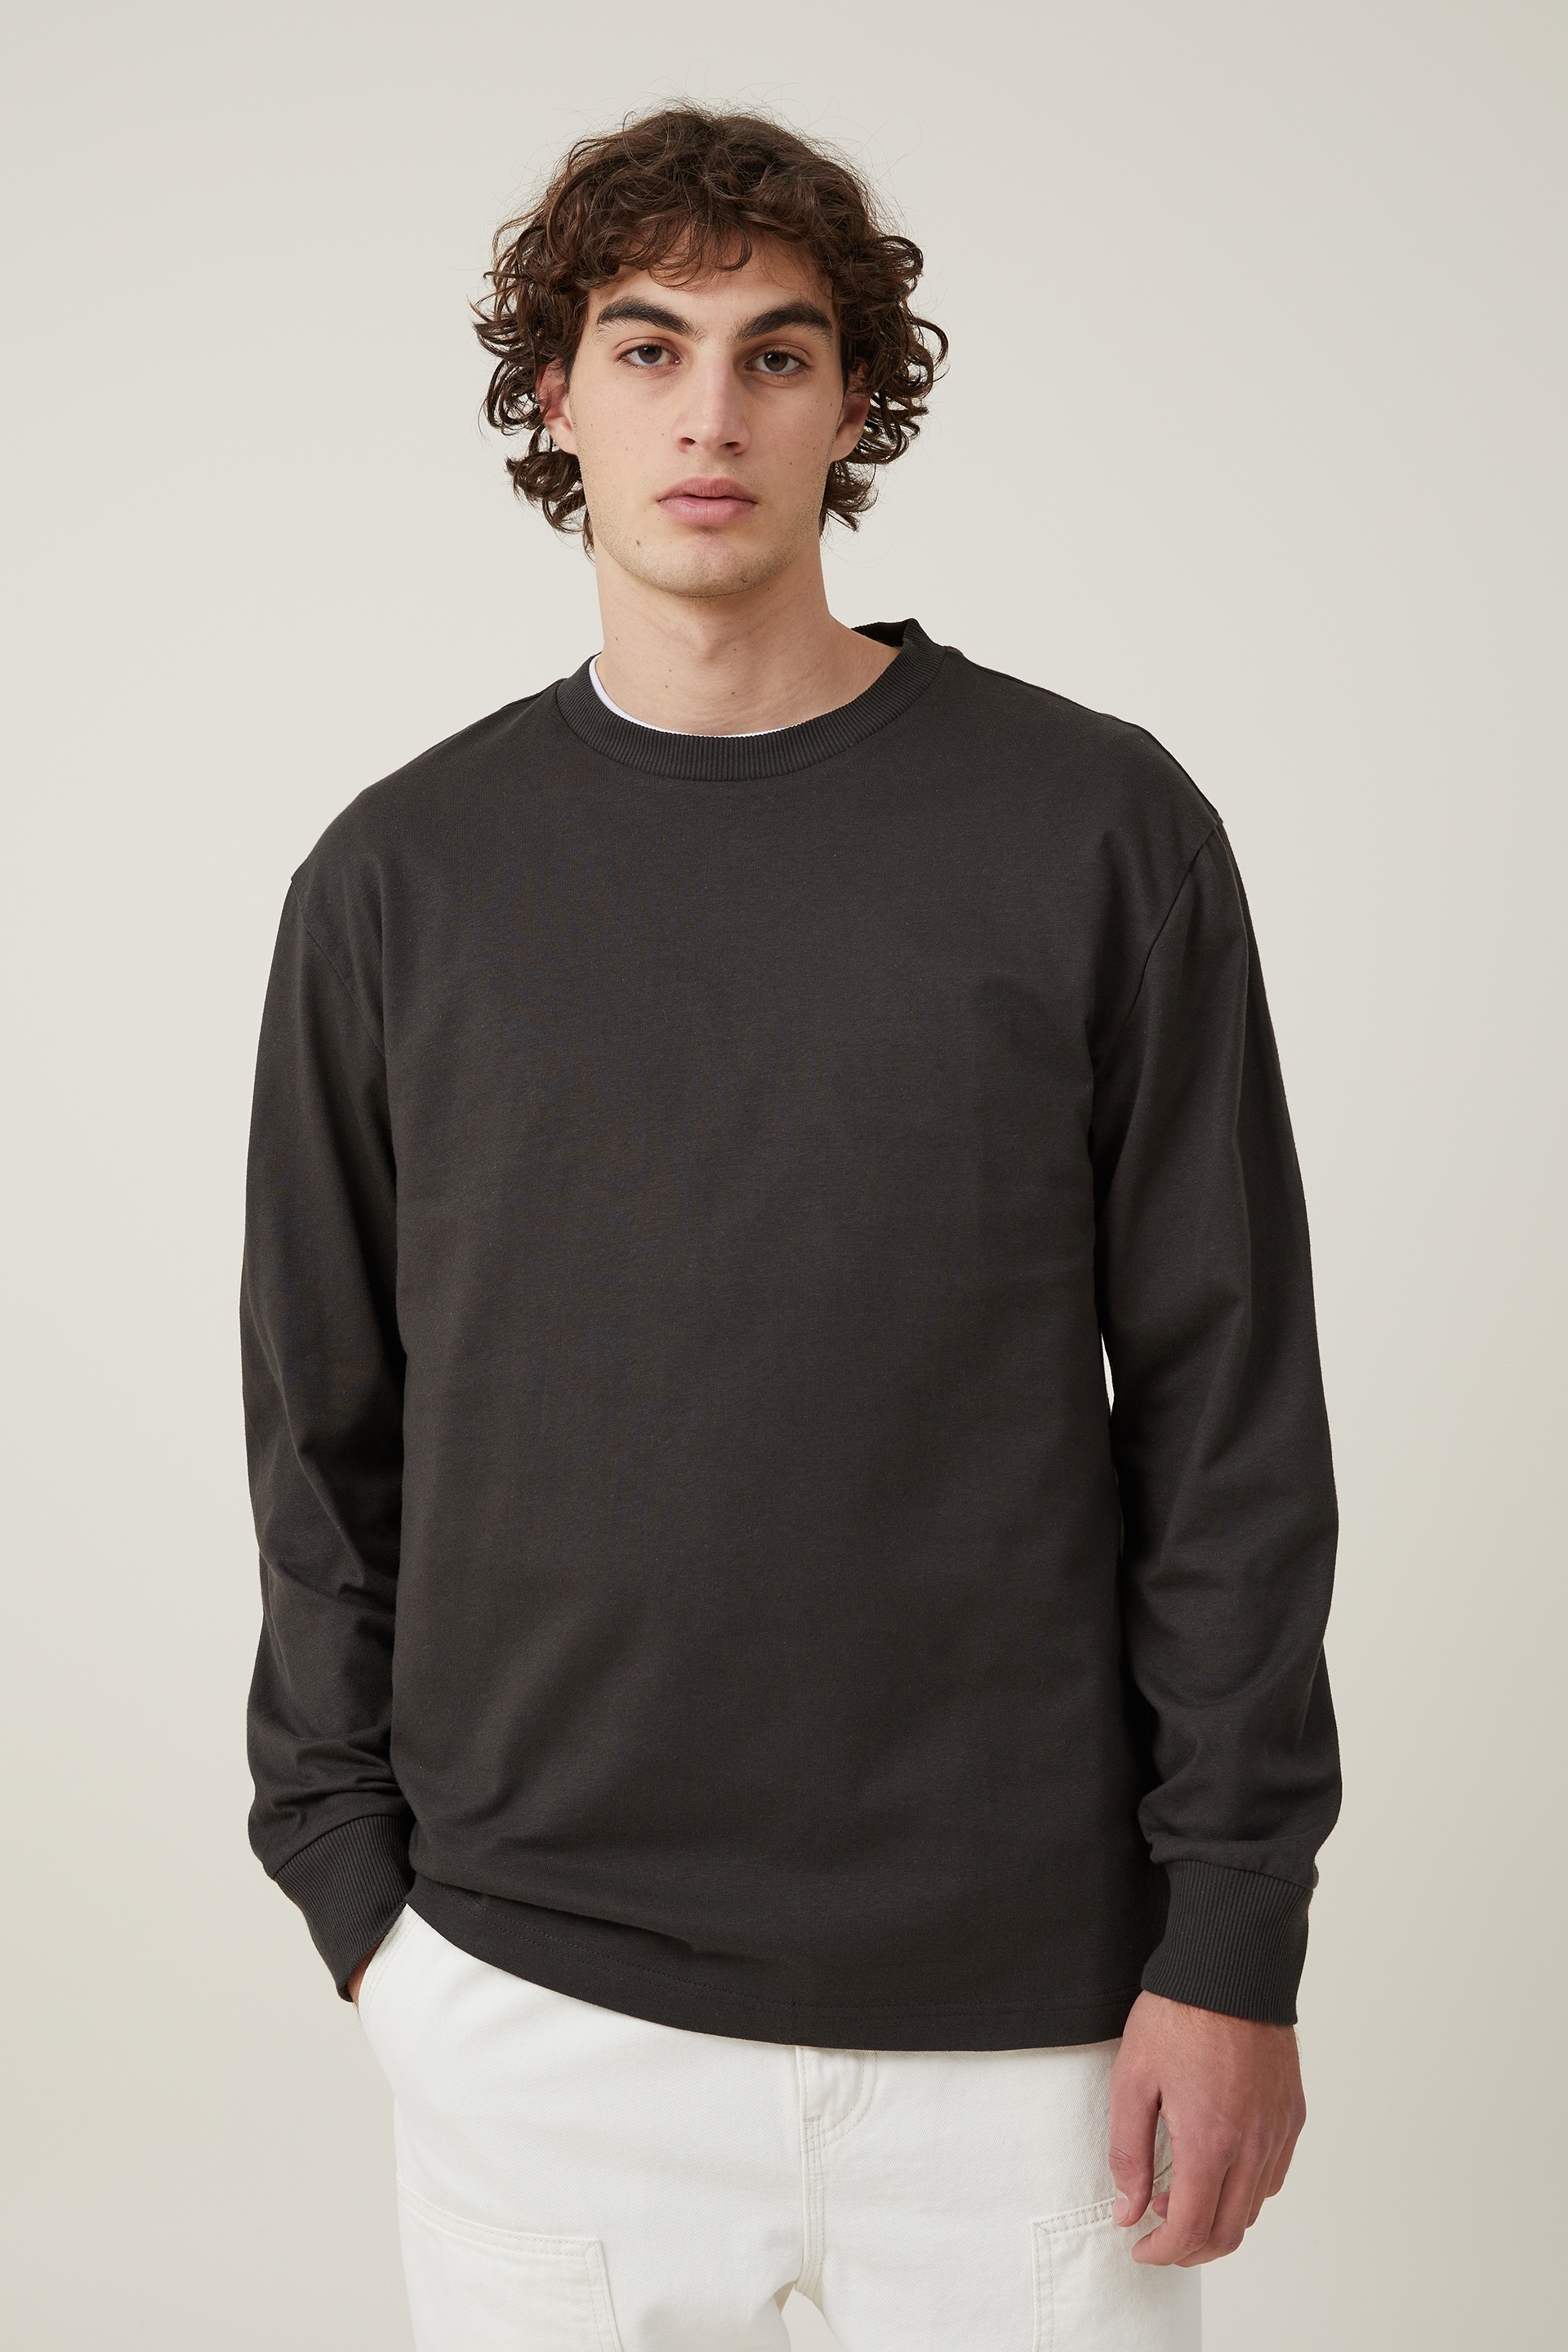 Cotton On Men - Loose Fit Long Sleeve Tshirt - Washed black